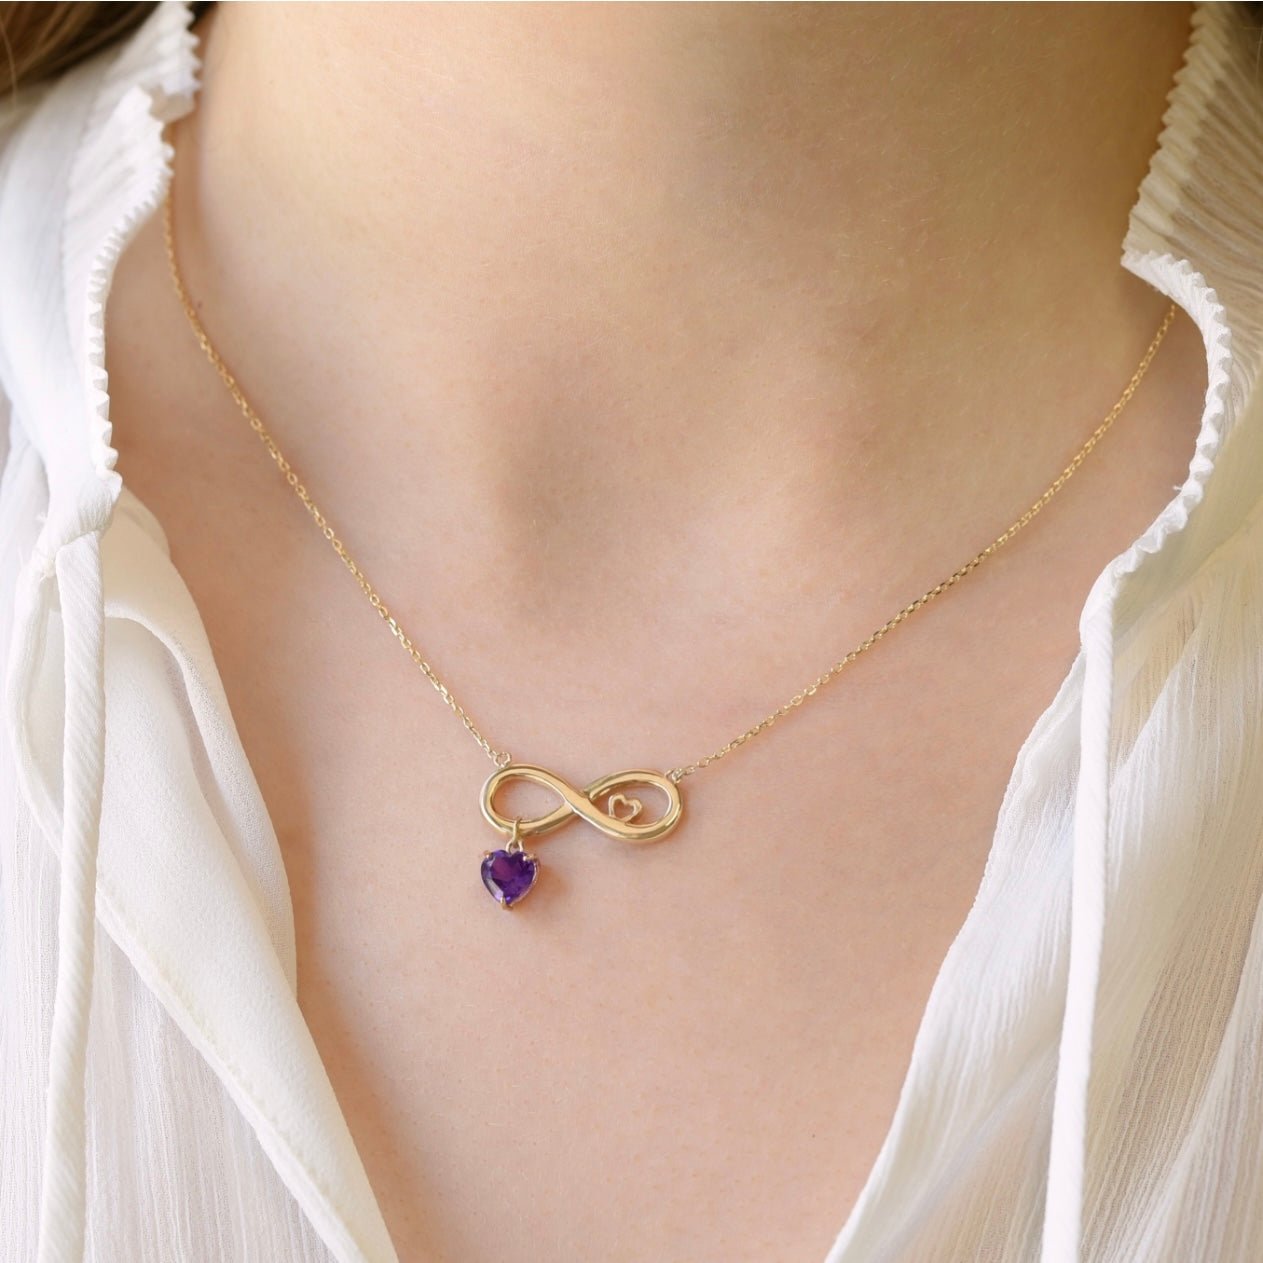 Infinity Heart Necklace in Amethyst - 18k Gold - Ly